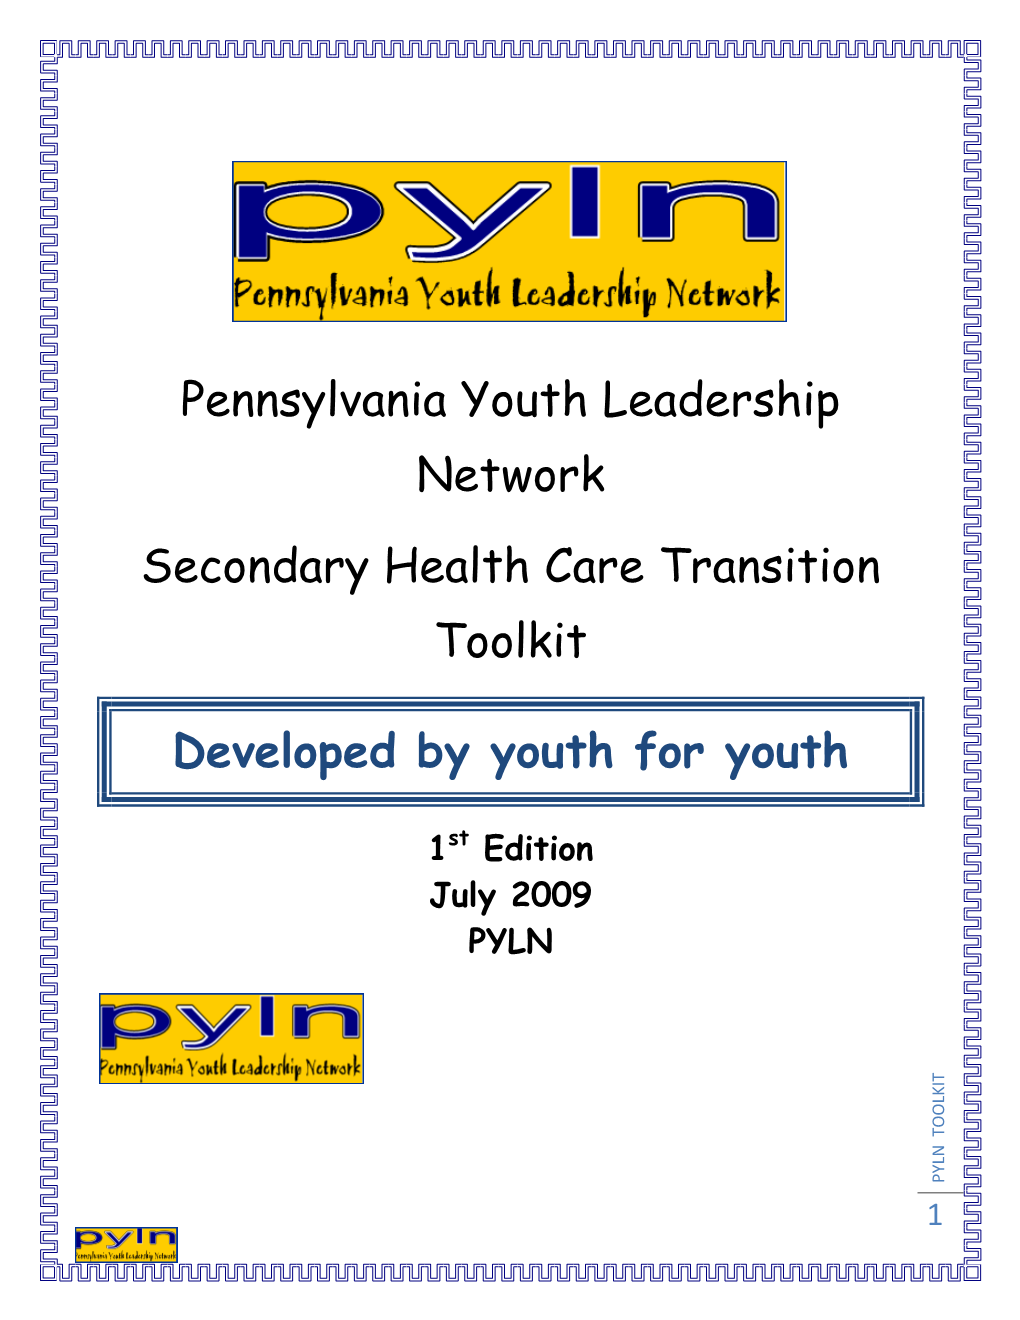 Pennsylvania Youth Leadership Network Secondary Health Care Transition Toolkit